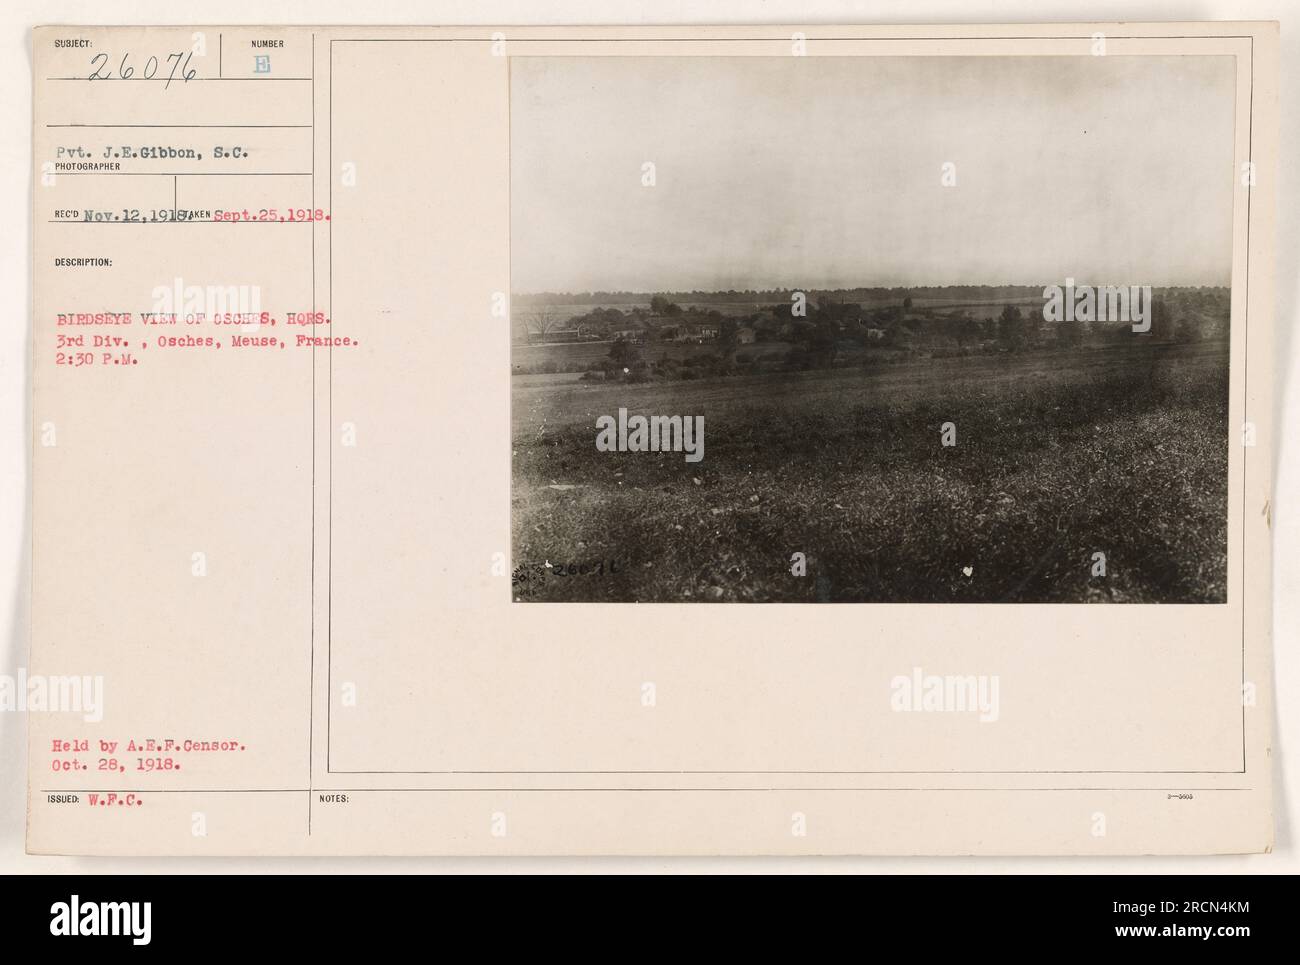 Pvt. J.E. Gibbon of the Signal Corps took this photograph, numbered 26076, on September 25, 1918, in Osches, Meuse, France. Taken from a bird's-eye view, it shows a view of Osches and its surroundings at 2:30 P.M. This photograph was held by the A.E.F. Censor and later issued by the W.F.C. Stock Photo